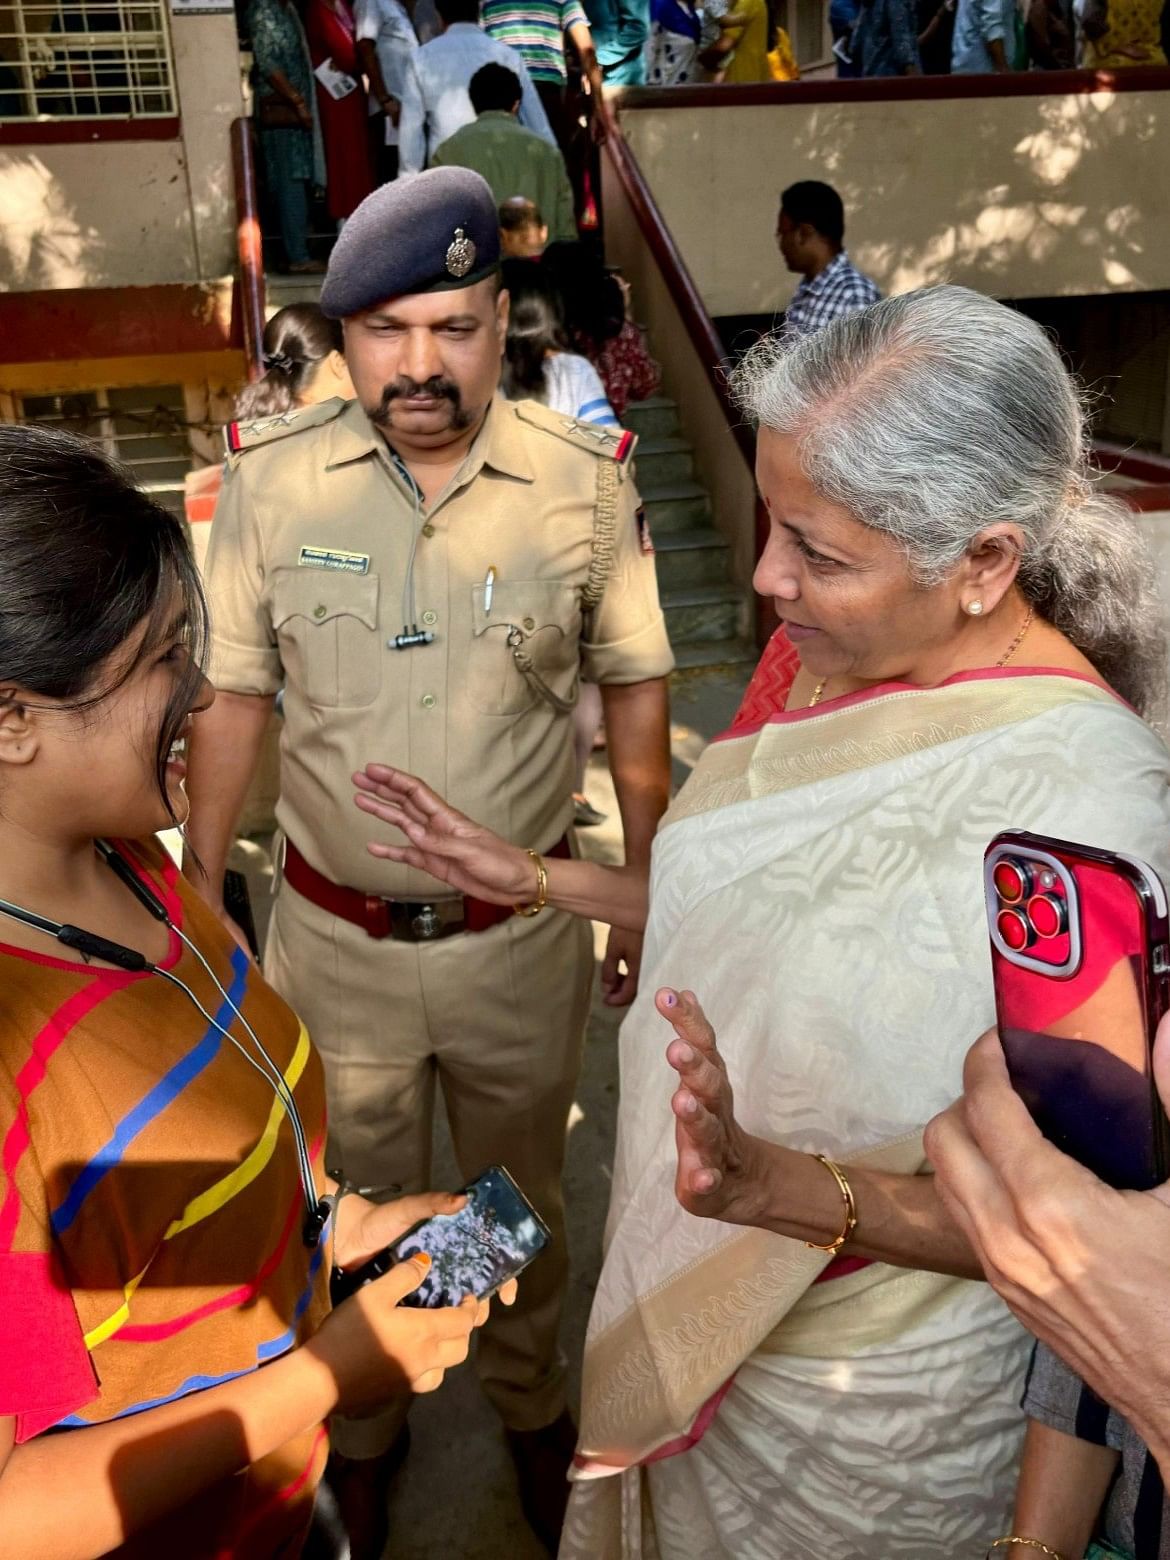 Finance Minister Nirmala Sitharaman interacts with voters at the polling booth in Jayanagar, Bengaluru.